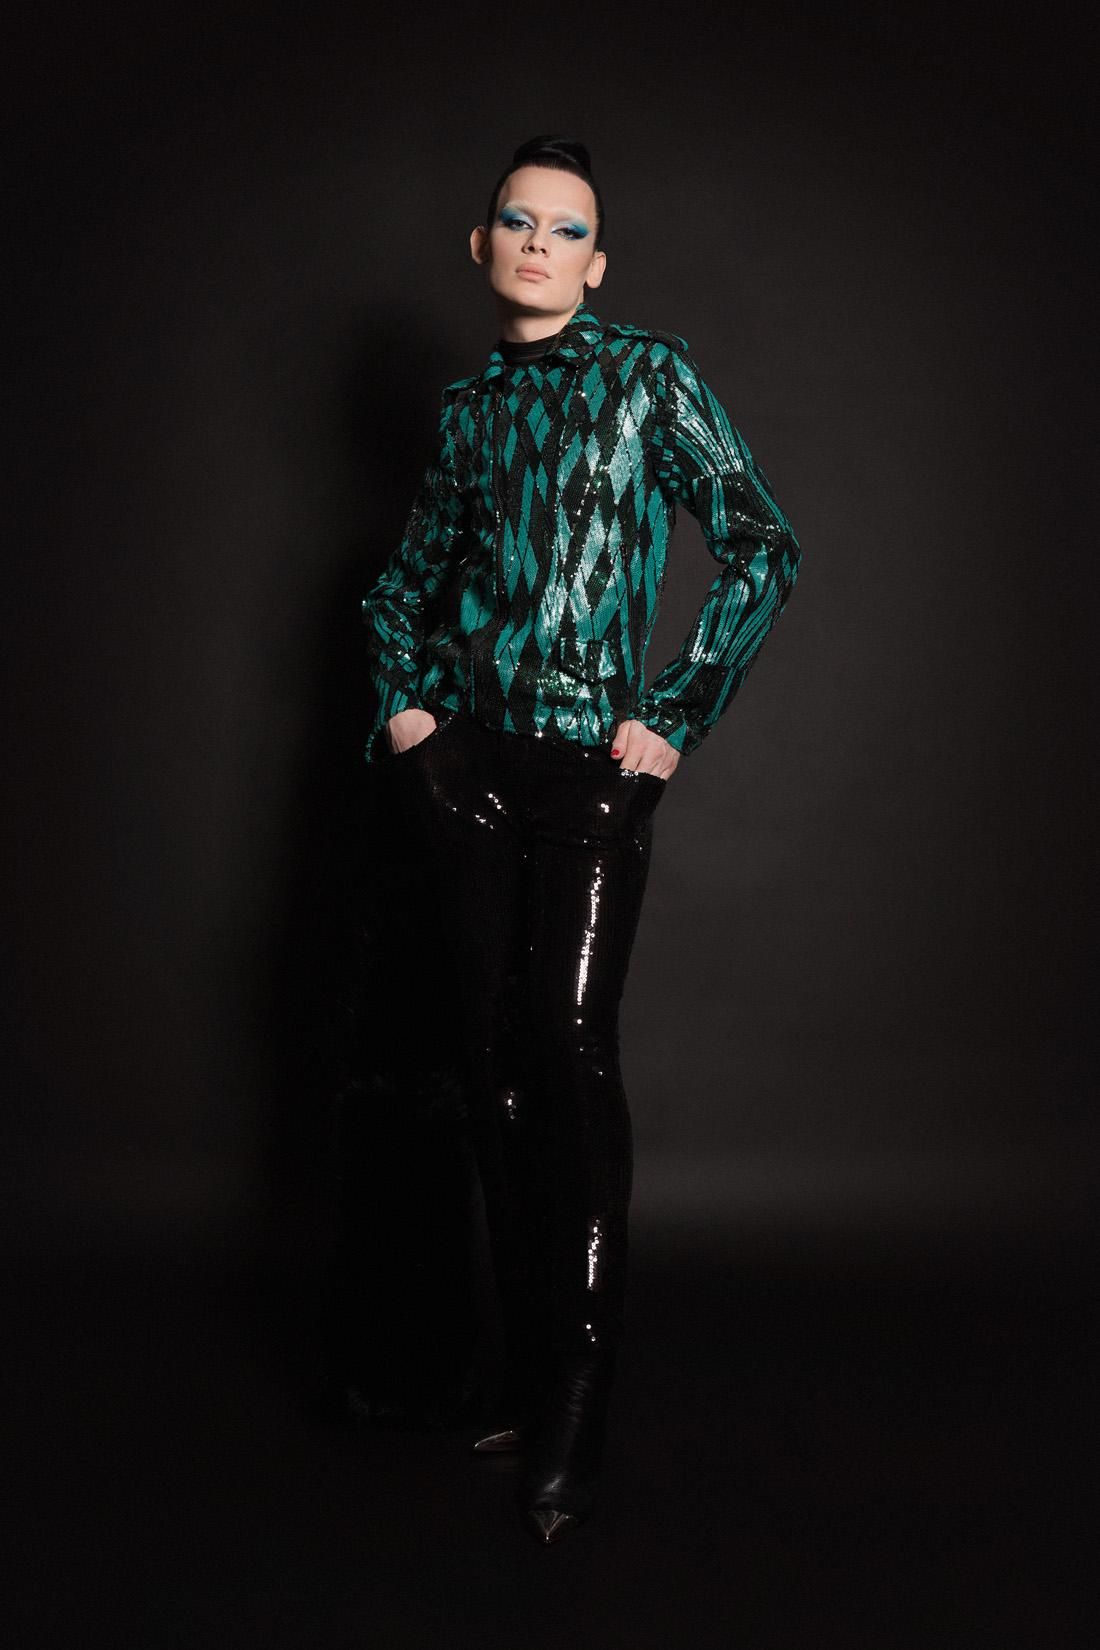 Cheng's Fall '18 Collection is the Lovechild of Anna May Wong & Marlene Dietrich